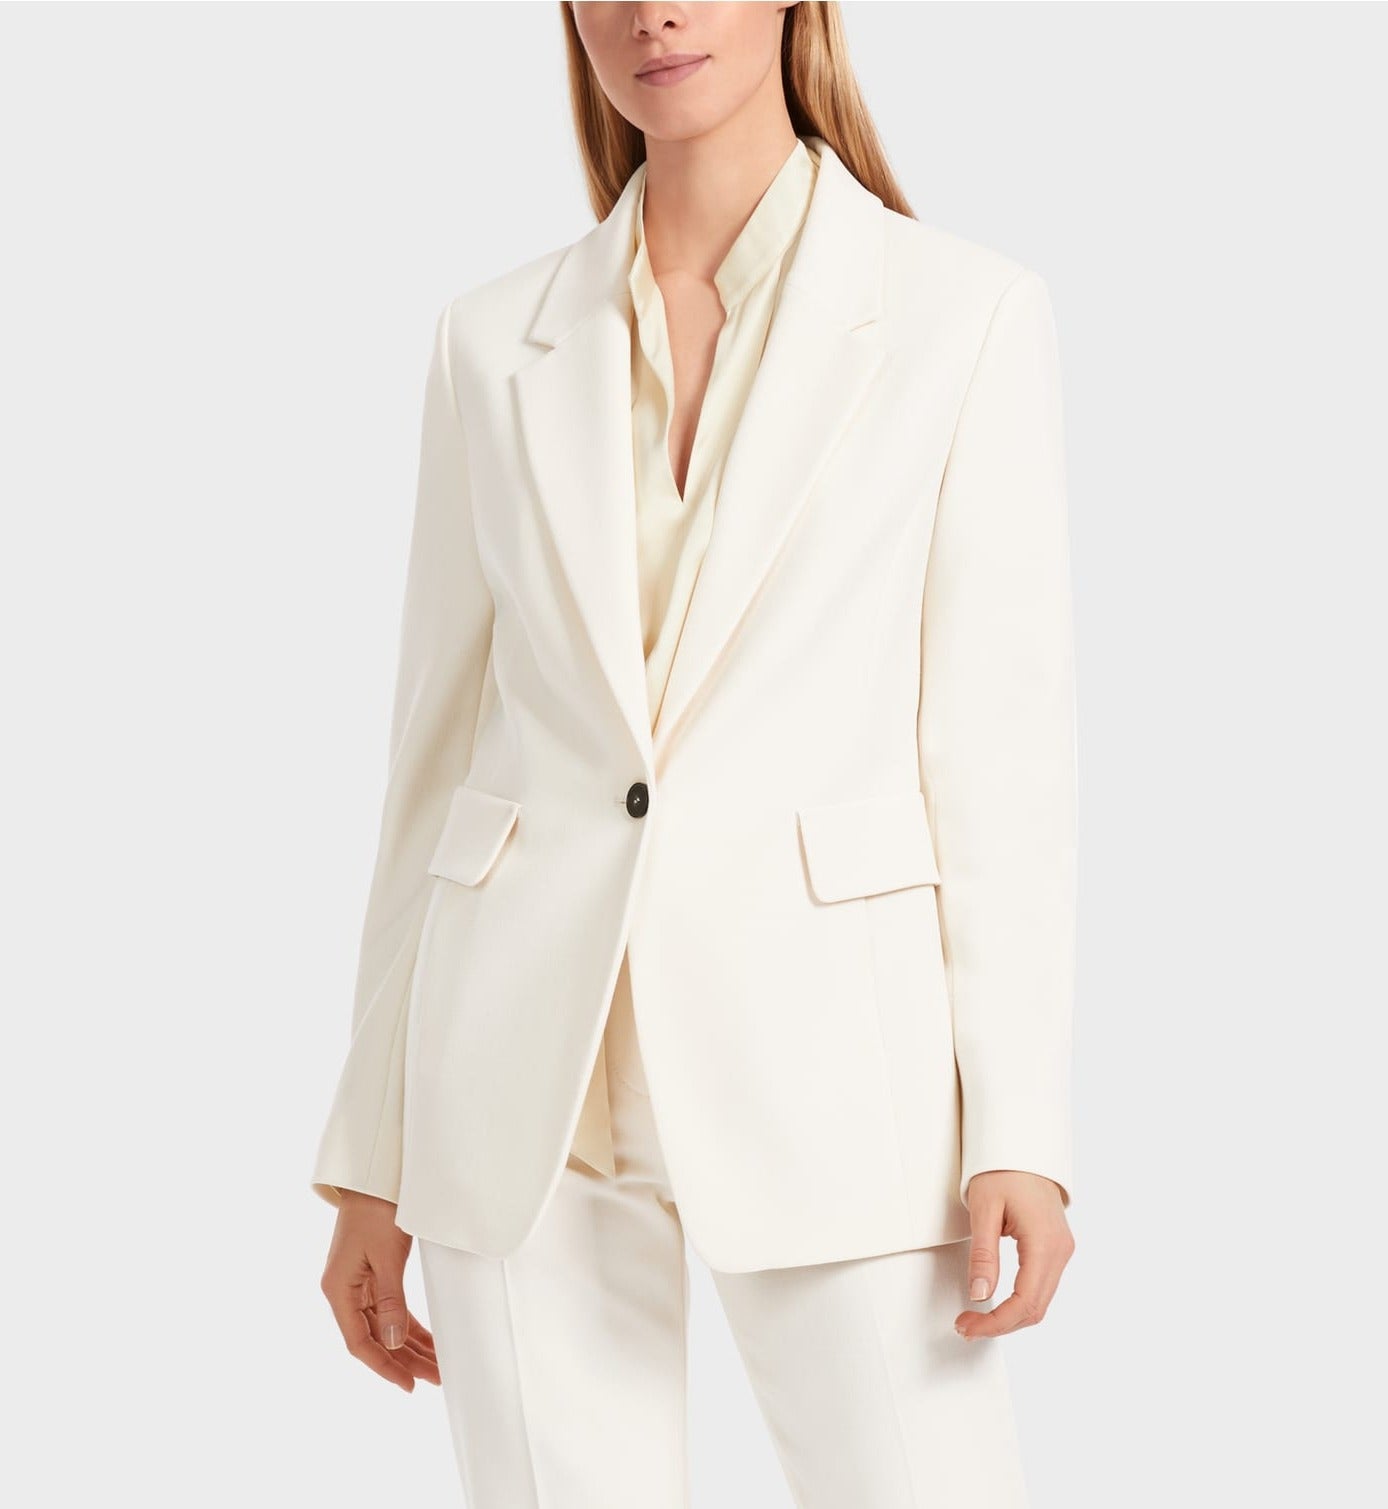 Close Fitting Blazer with Back Slit in Soft Cream